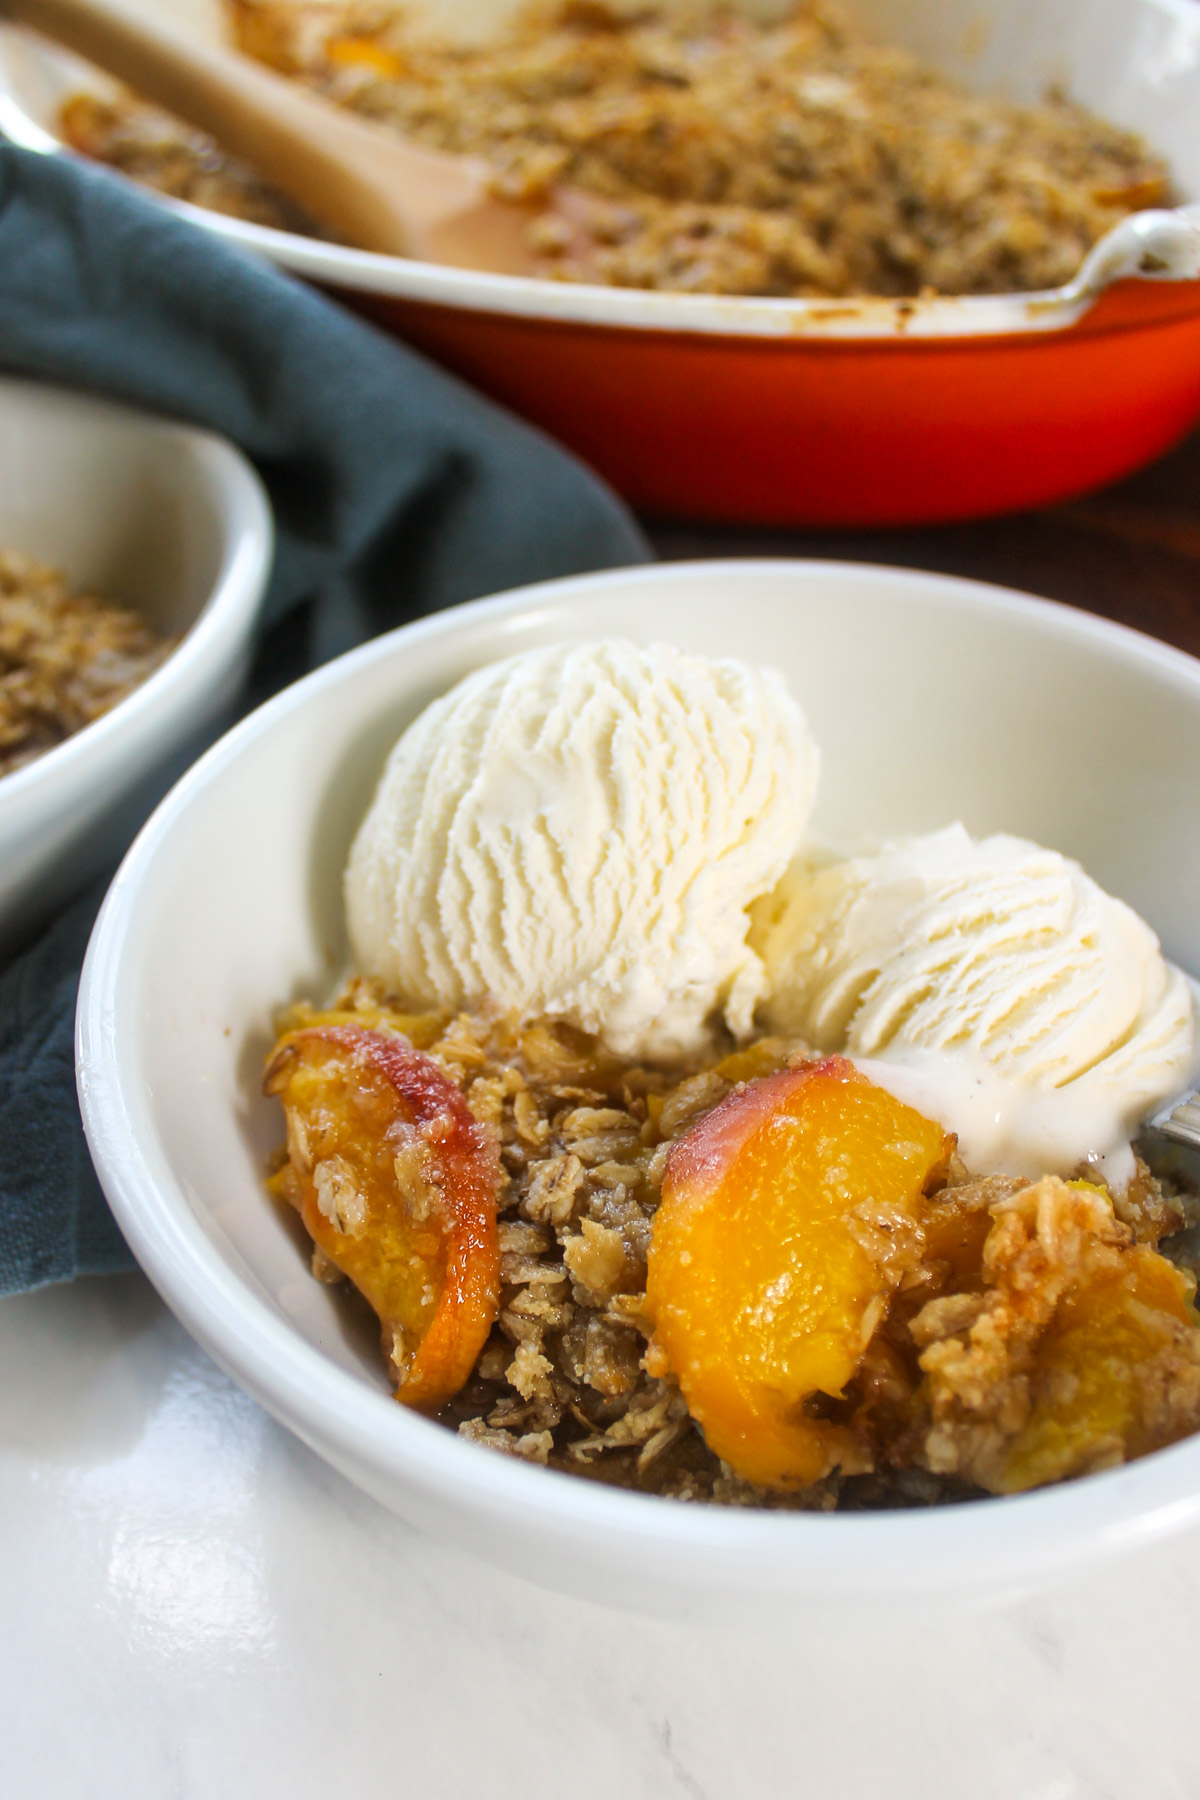 A serving of peach crisp with ice cream in front of the baking dish.